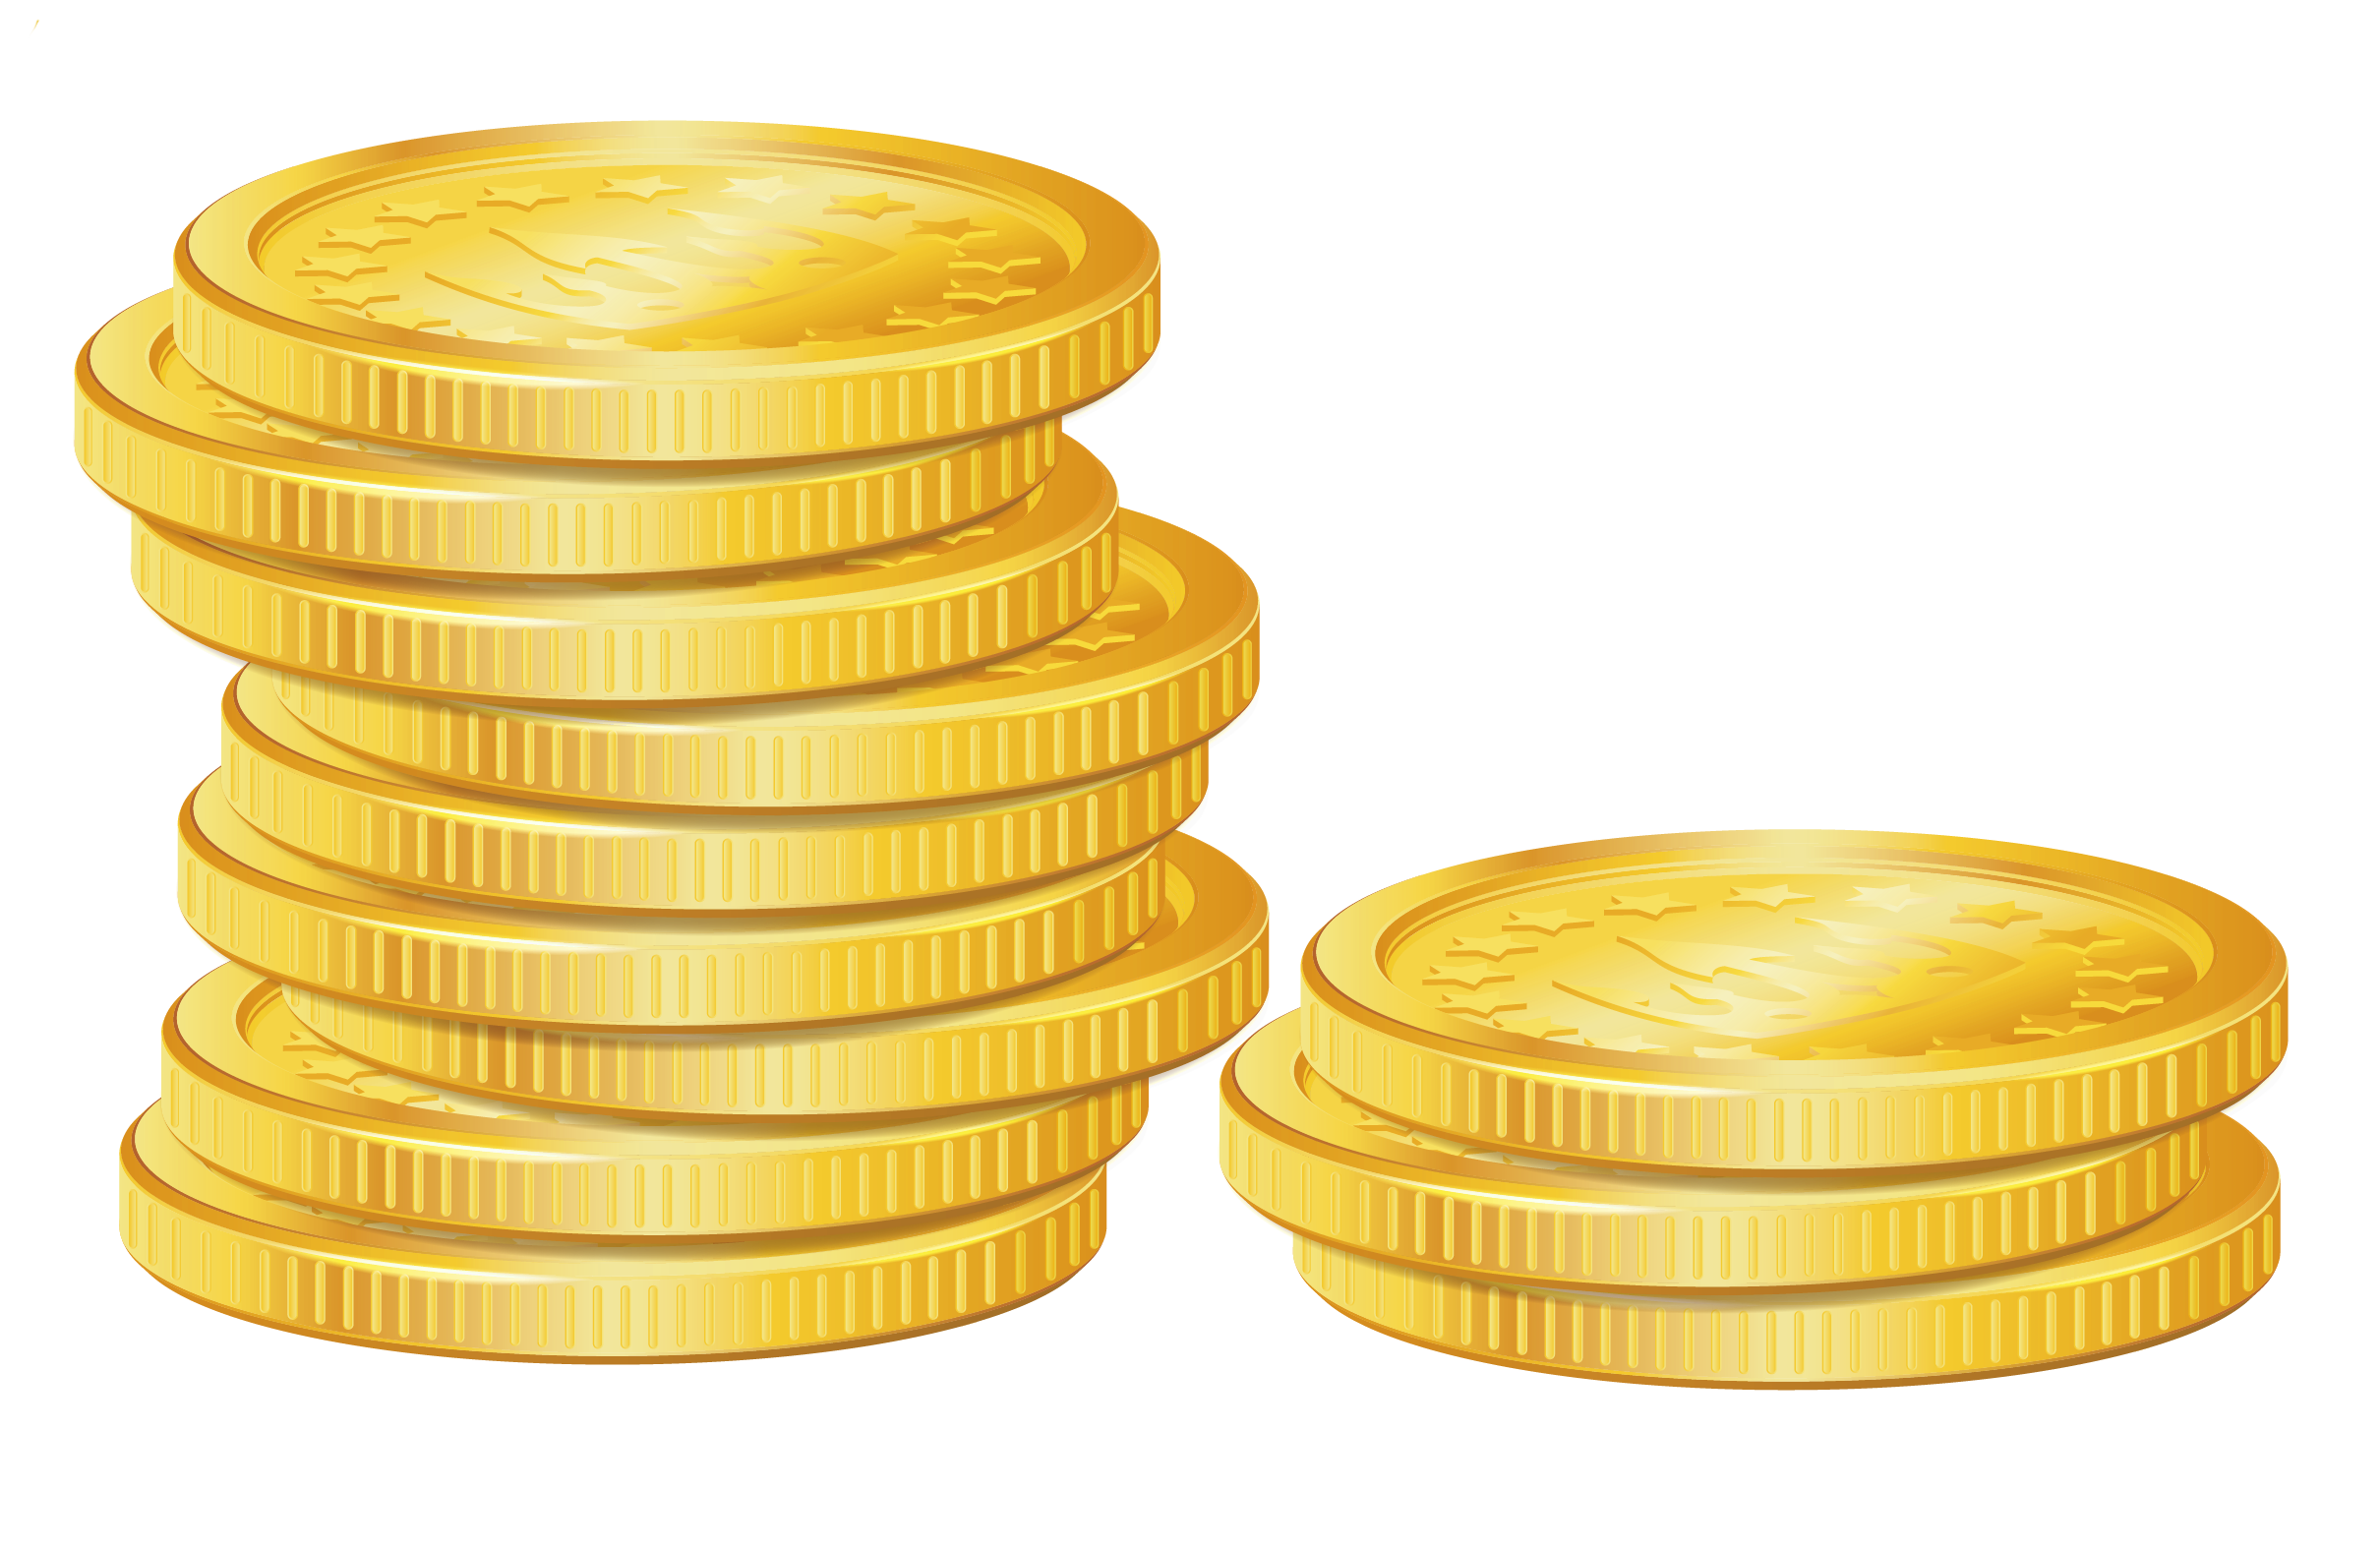 Stack of gold coins clip art free vector image 